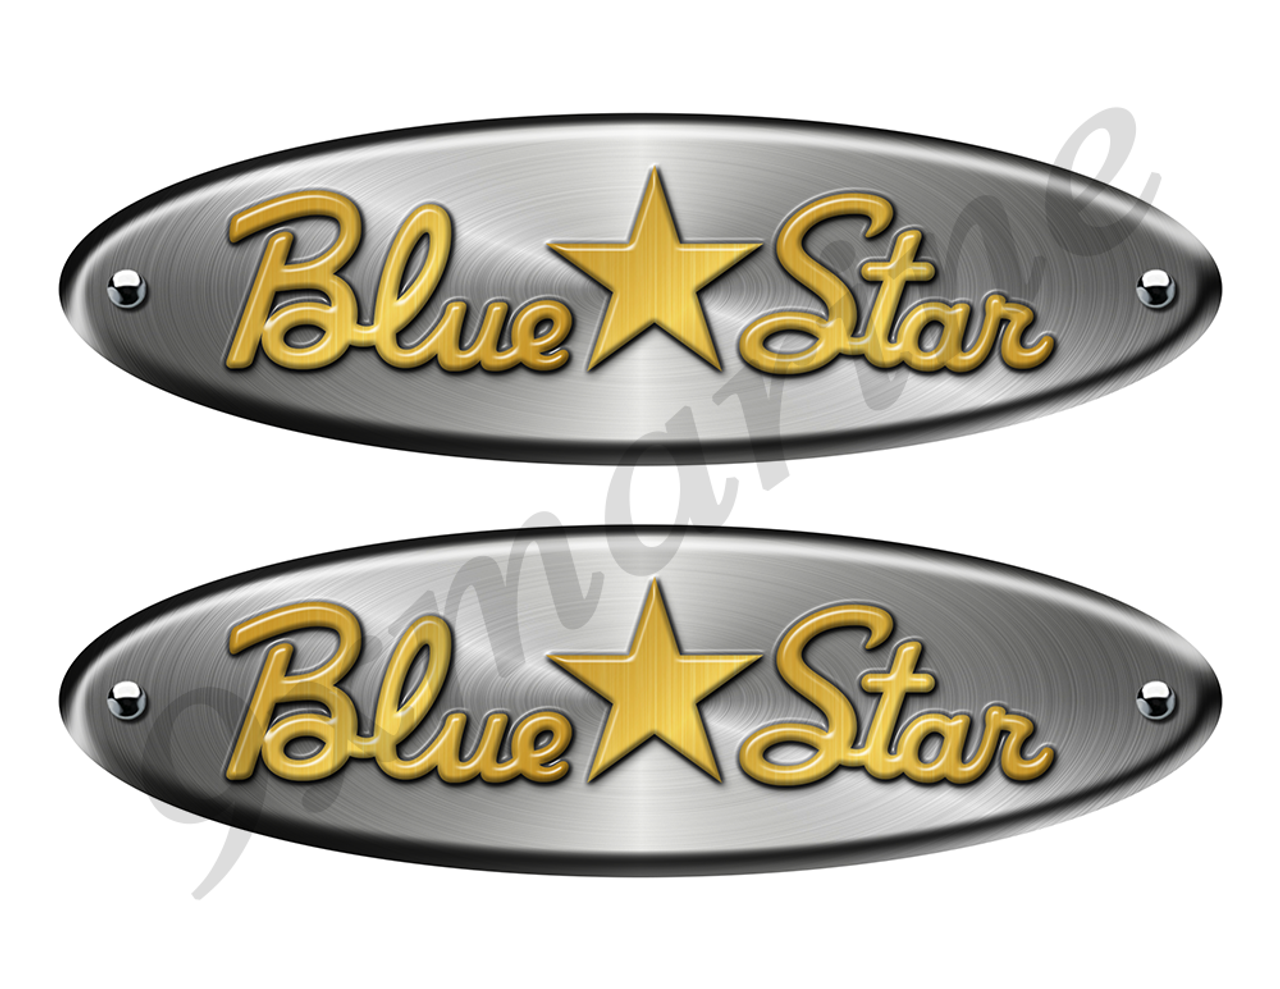 Blue Star Oval Remastered Stickers. Brushed Metal Style - 10" long